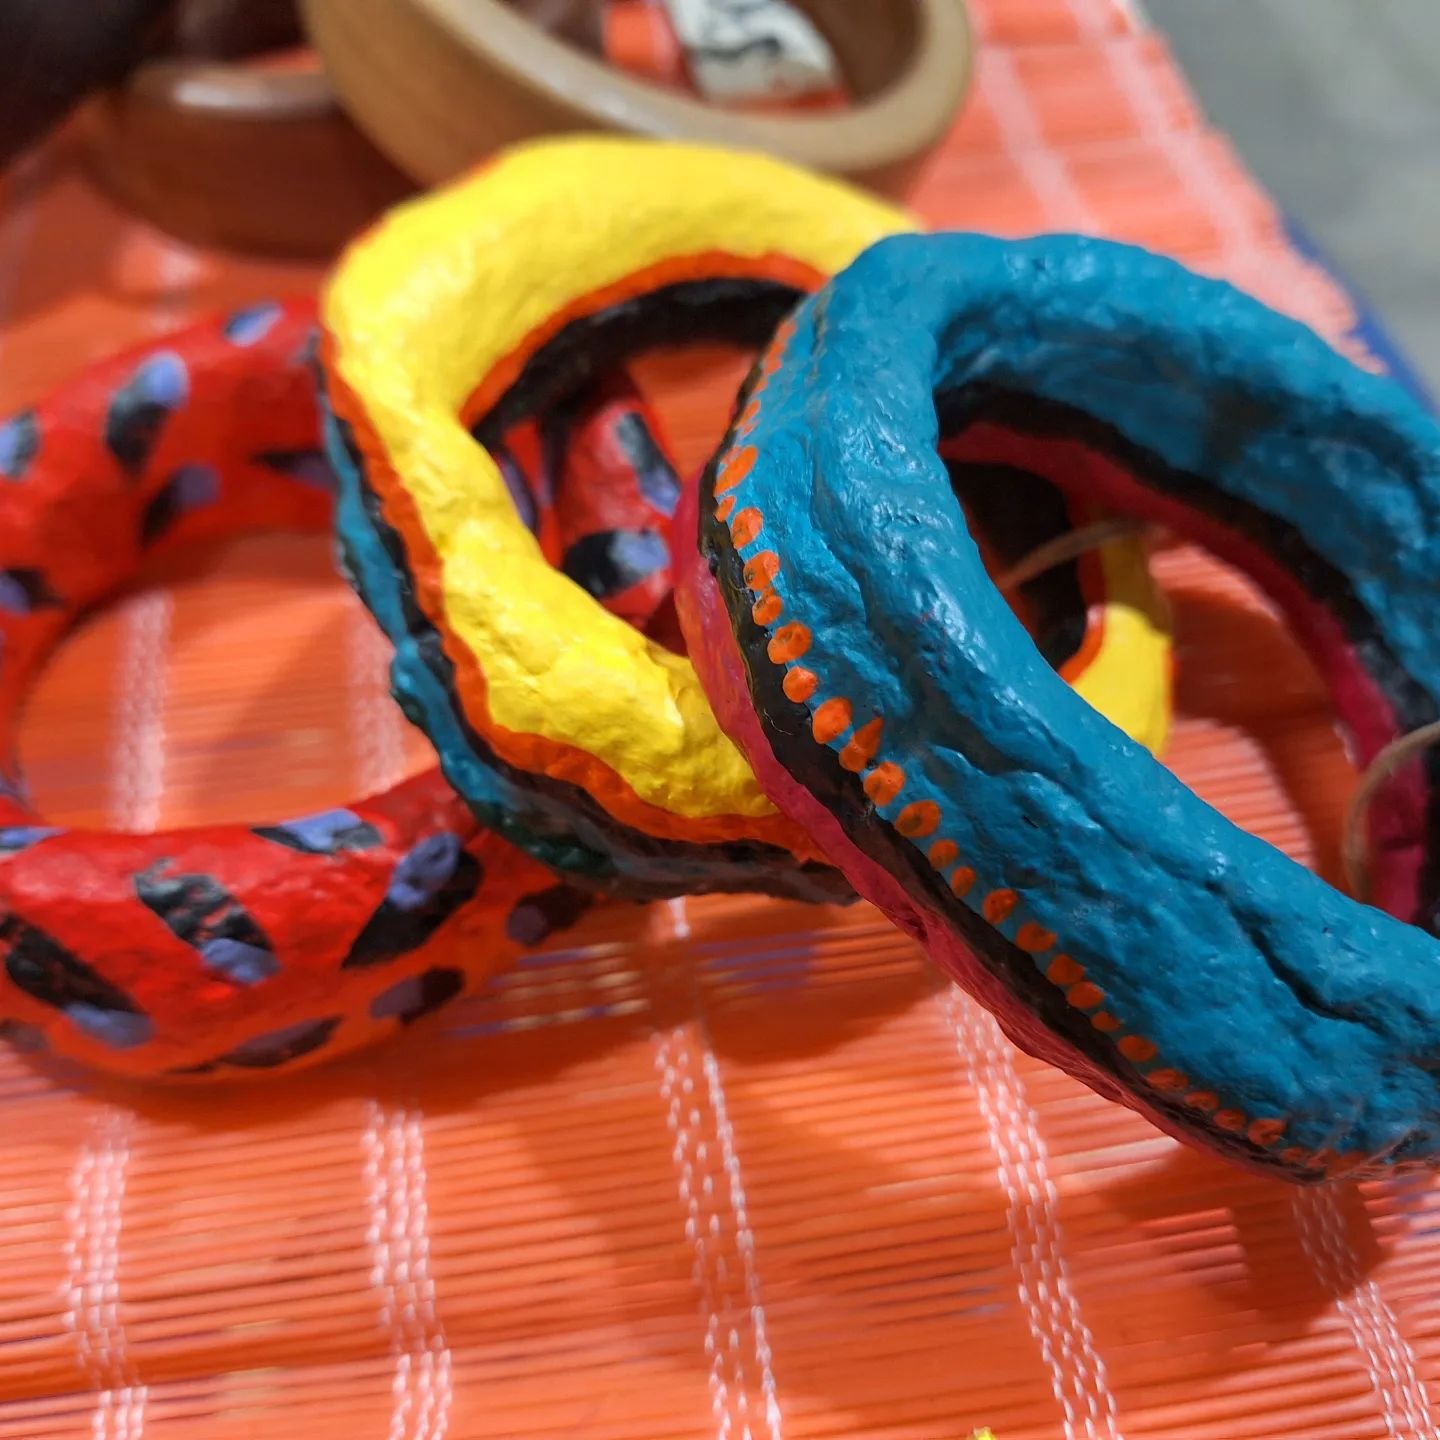 Bangles! Handmade from paper clay and handpainted. Inspired by all things 1980s, Memphis and colour!! Made by Mainichi and limited number available this weekend at @bowerbird.au